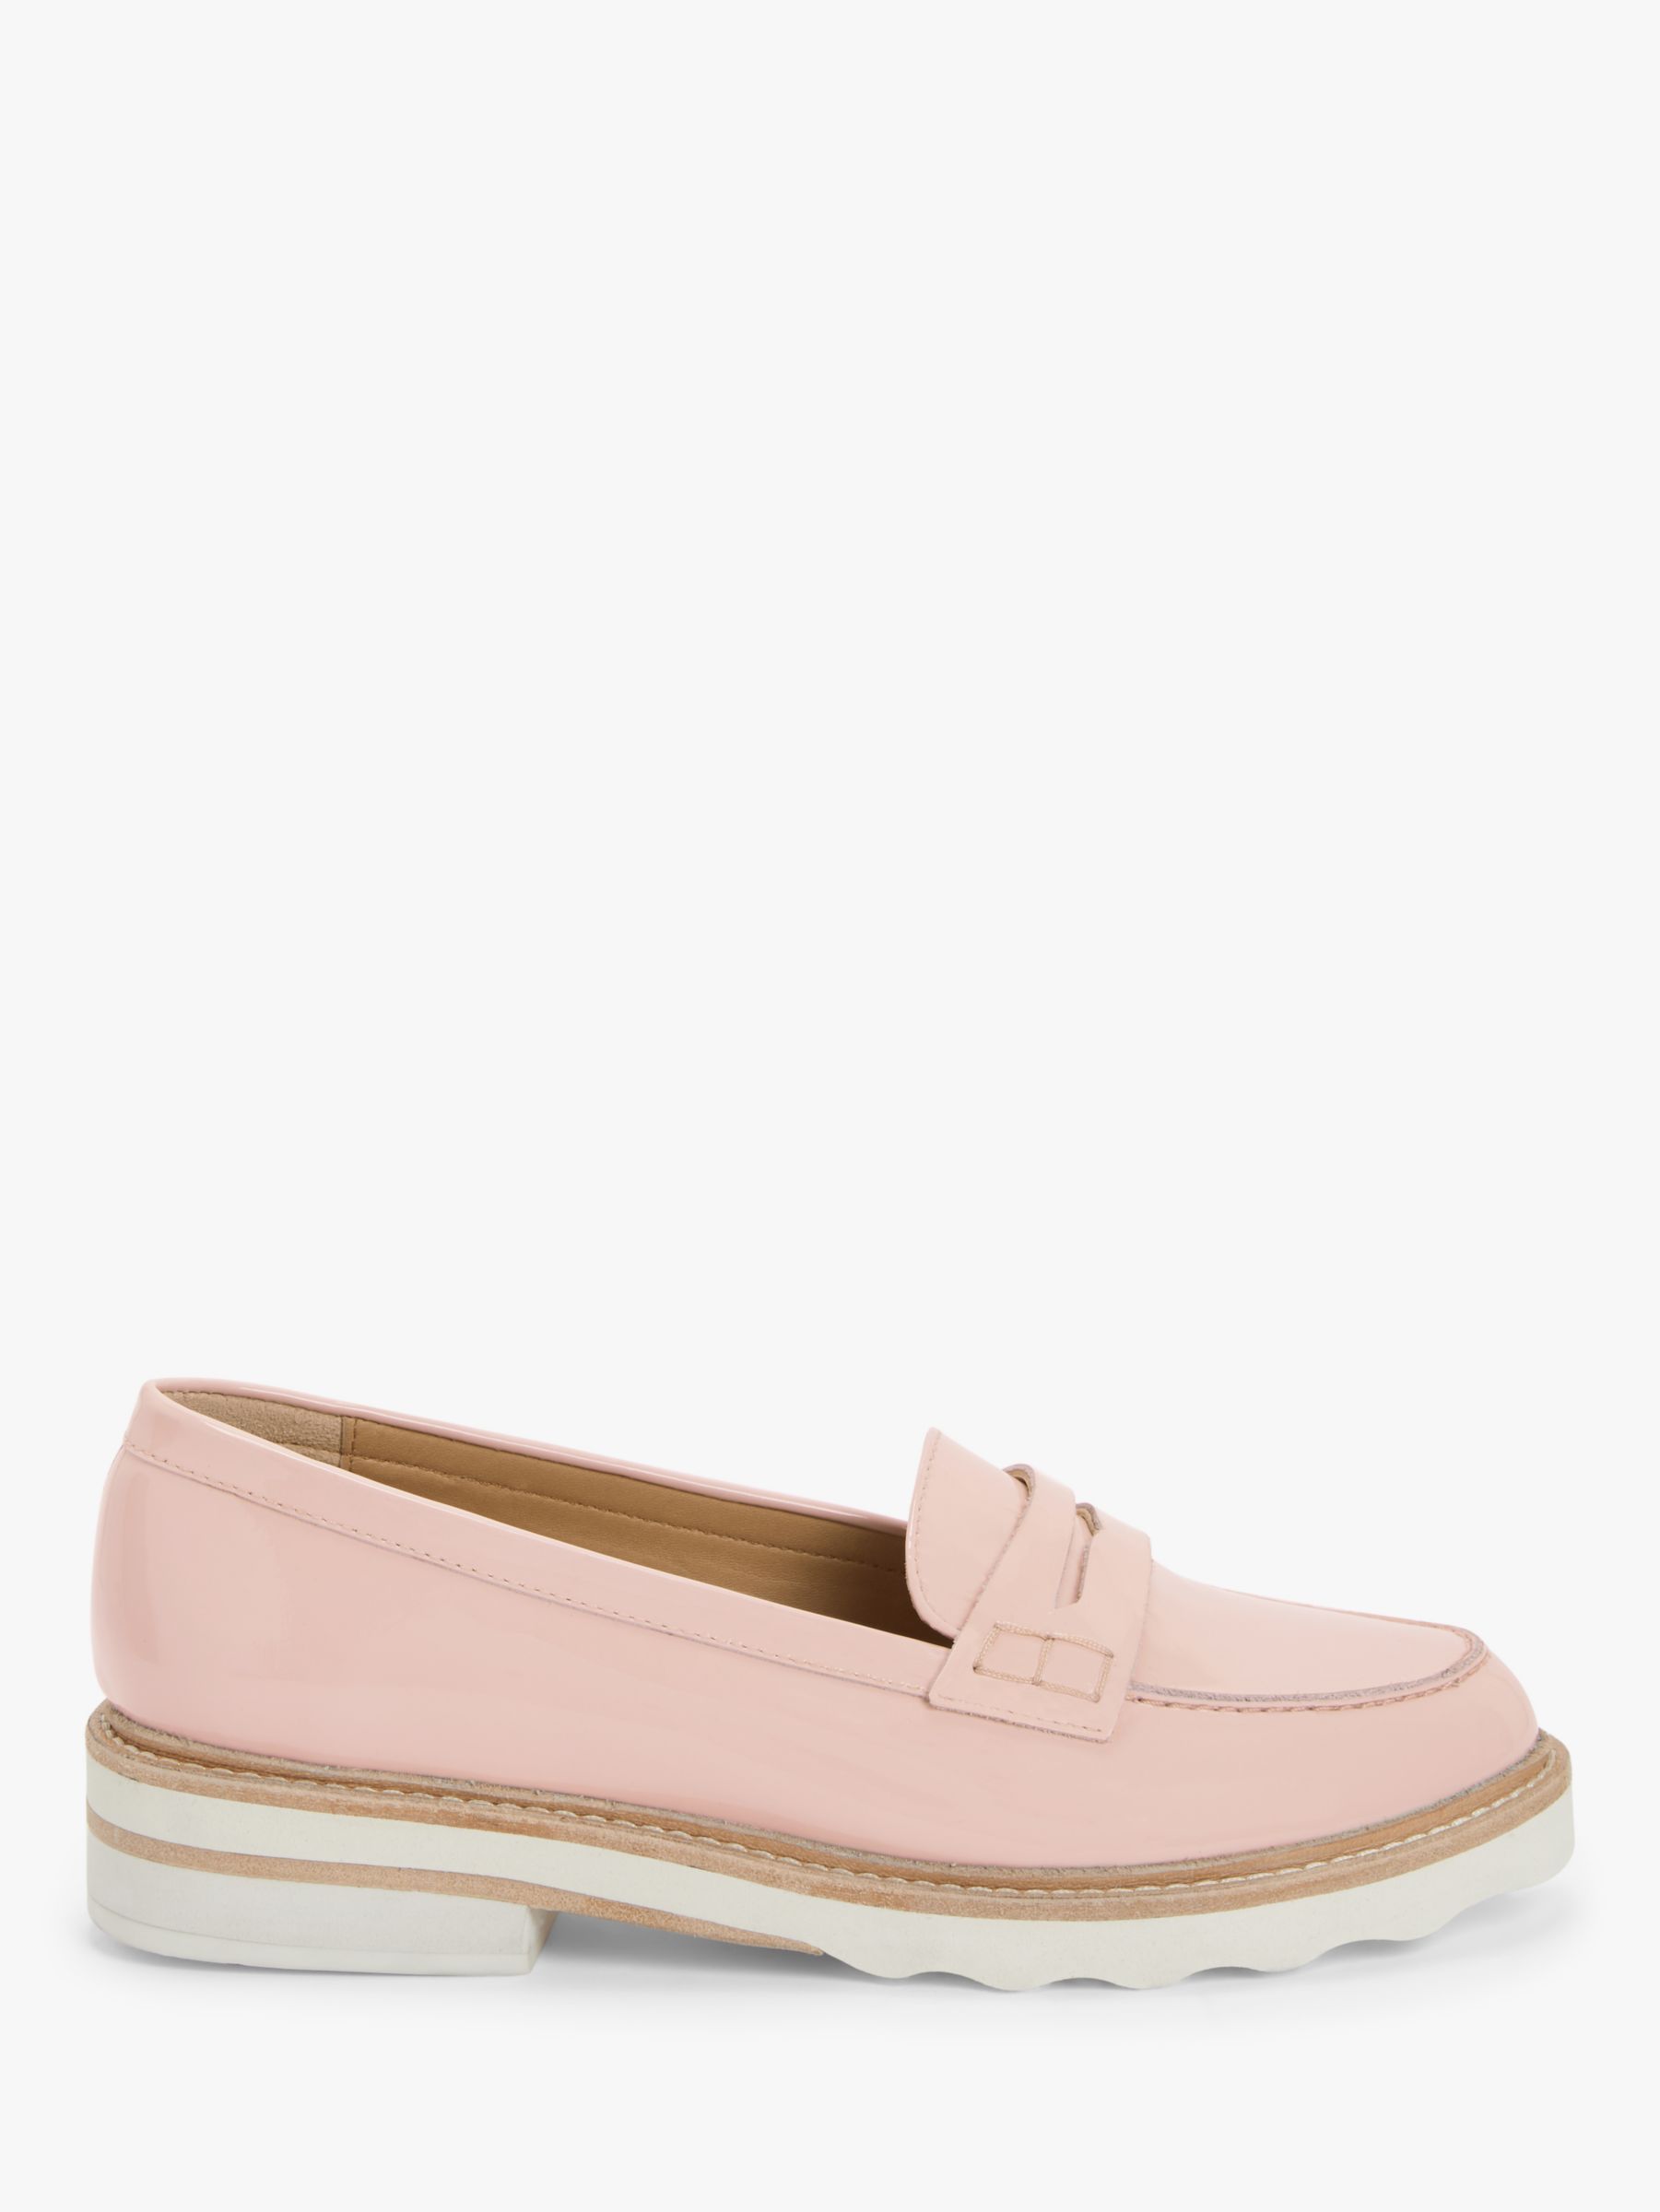 John Lewis & Partners Ginnie Leather Stitch Detail Loafers, Blush